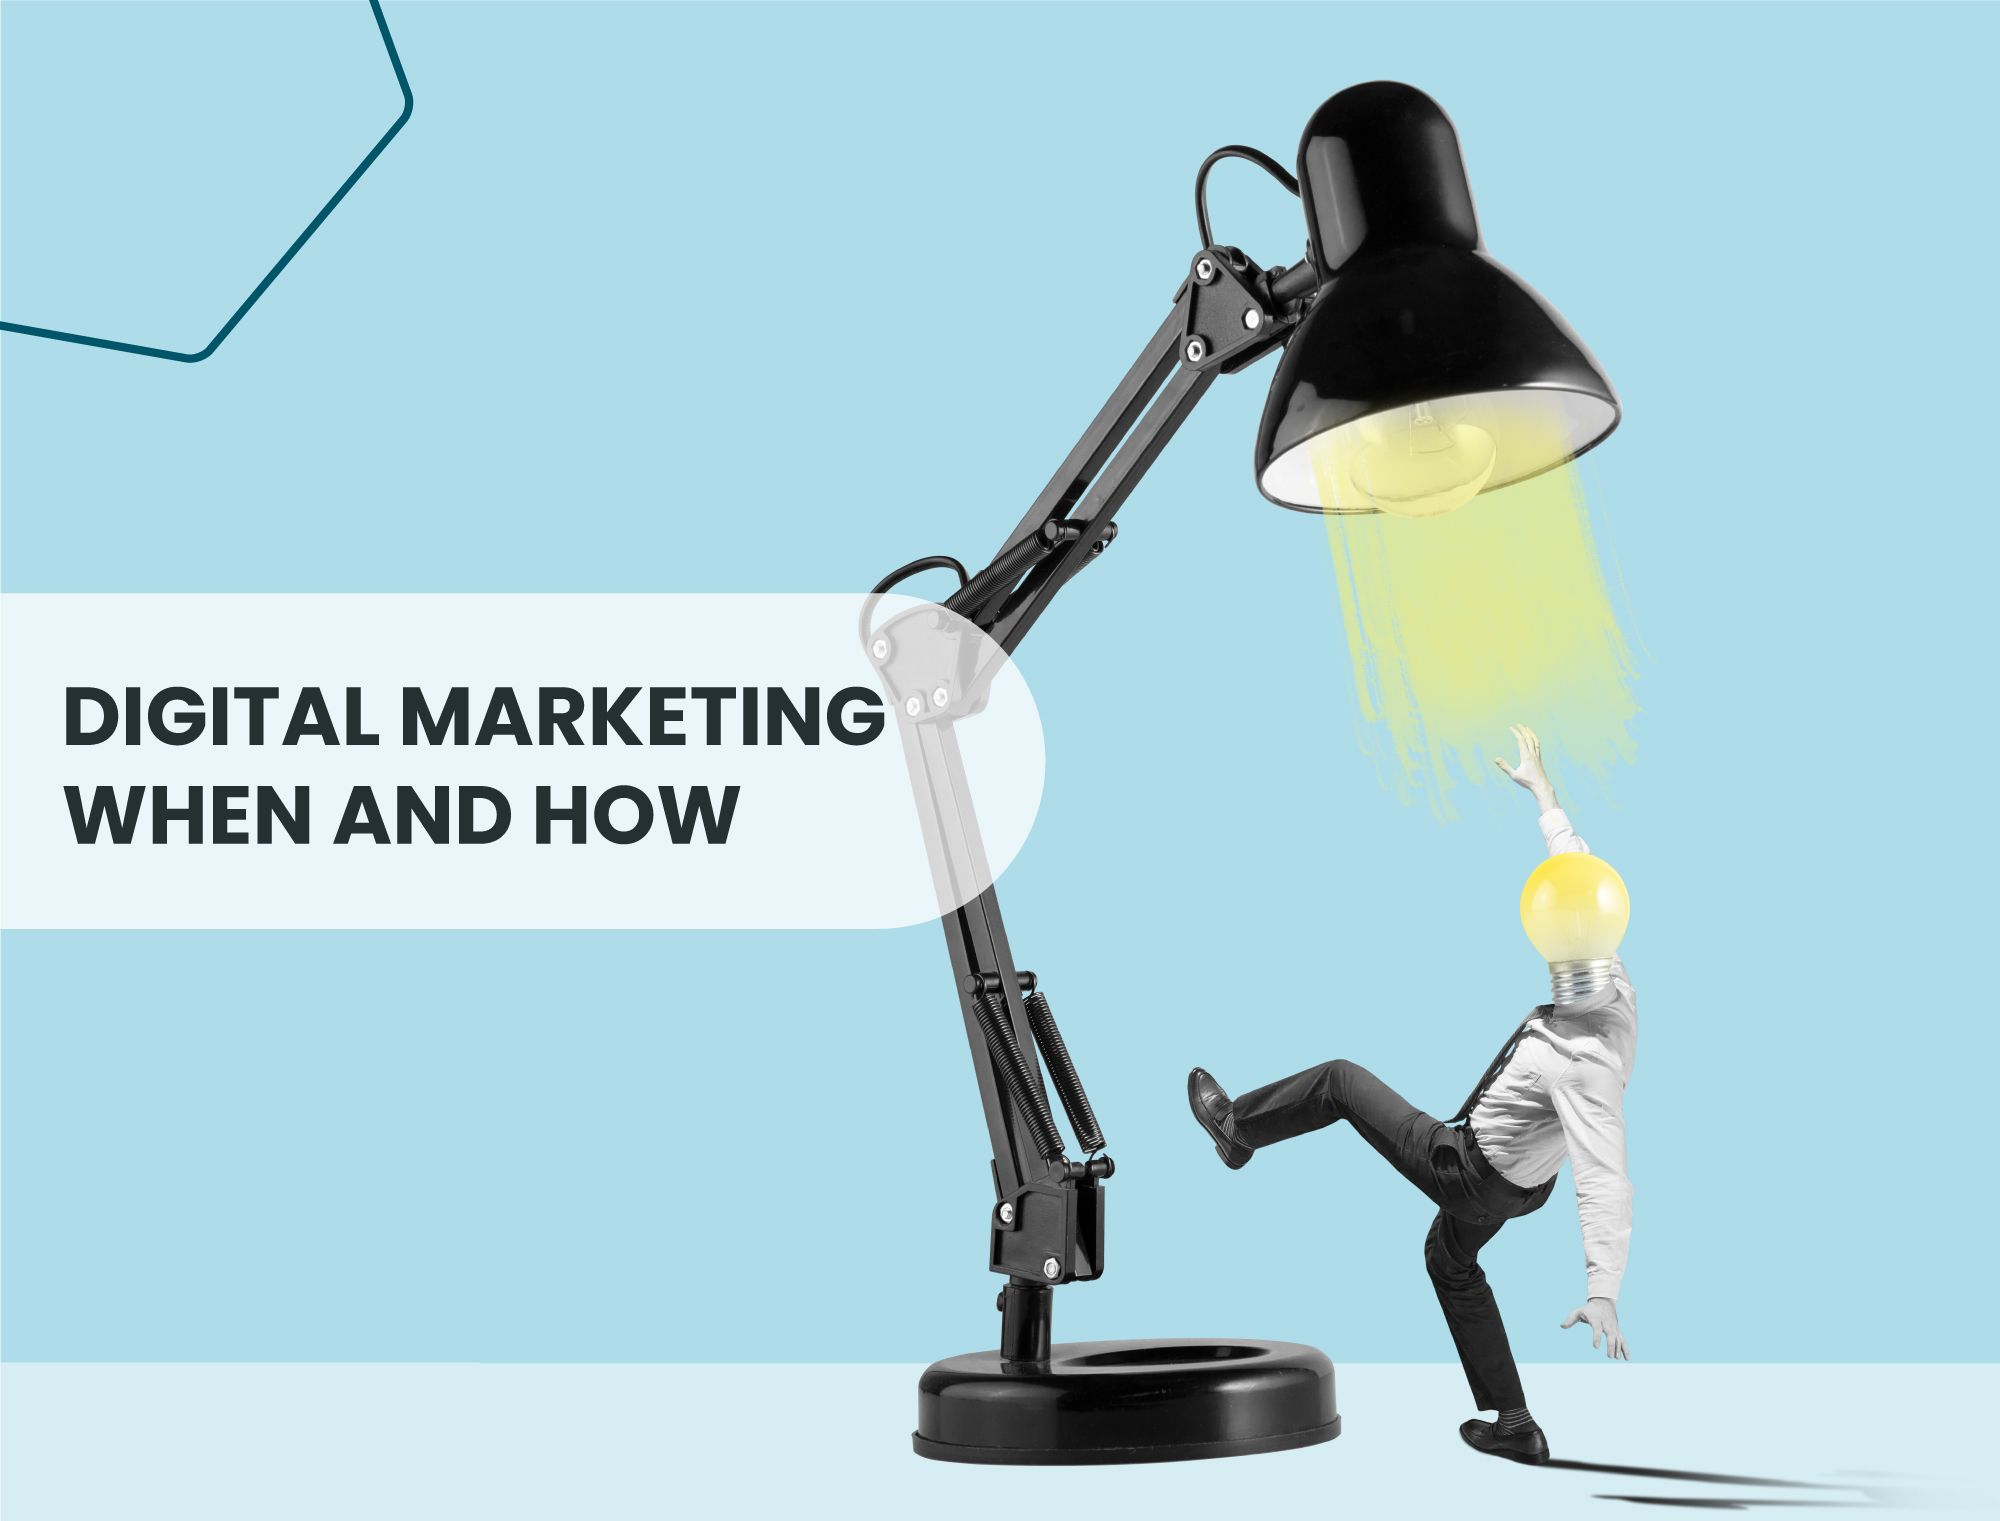 When and how do companies implement digital marketing?